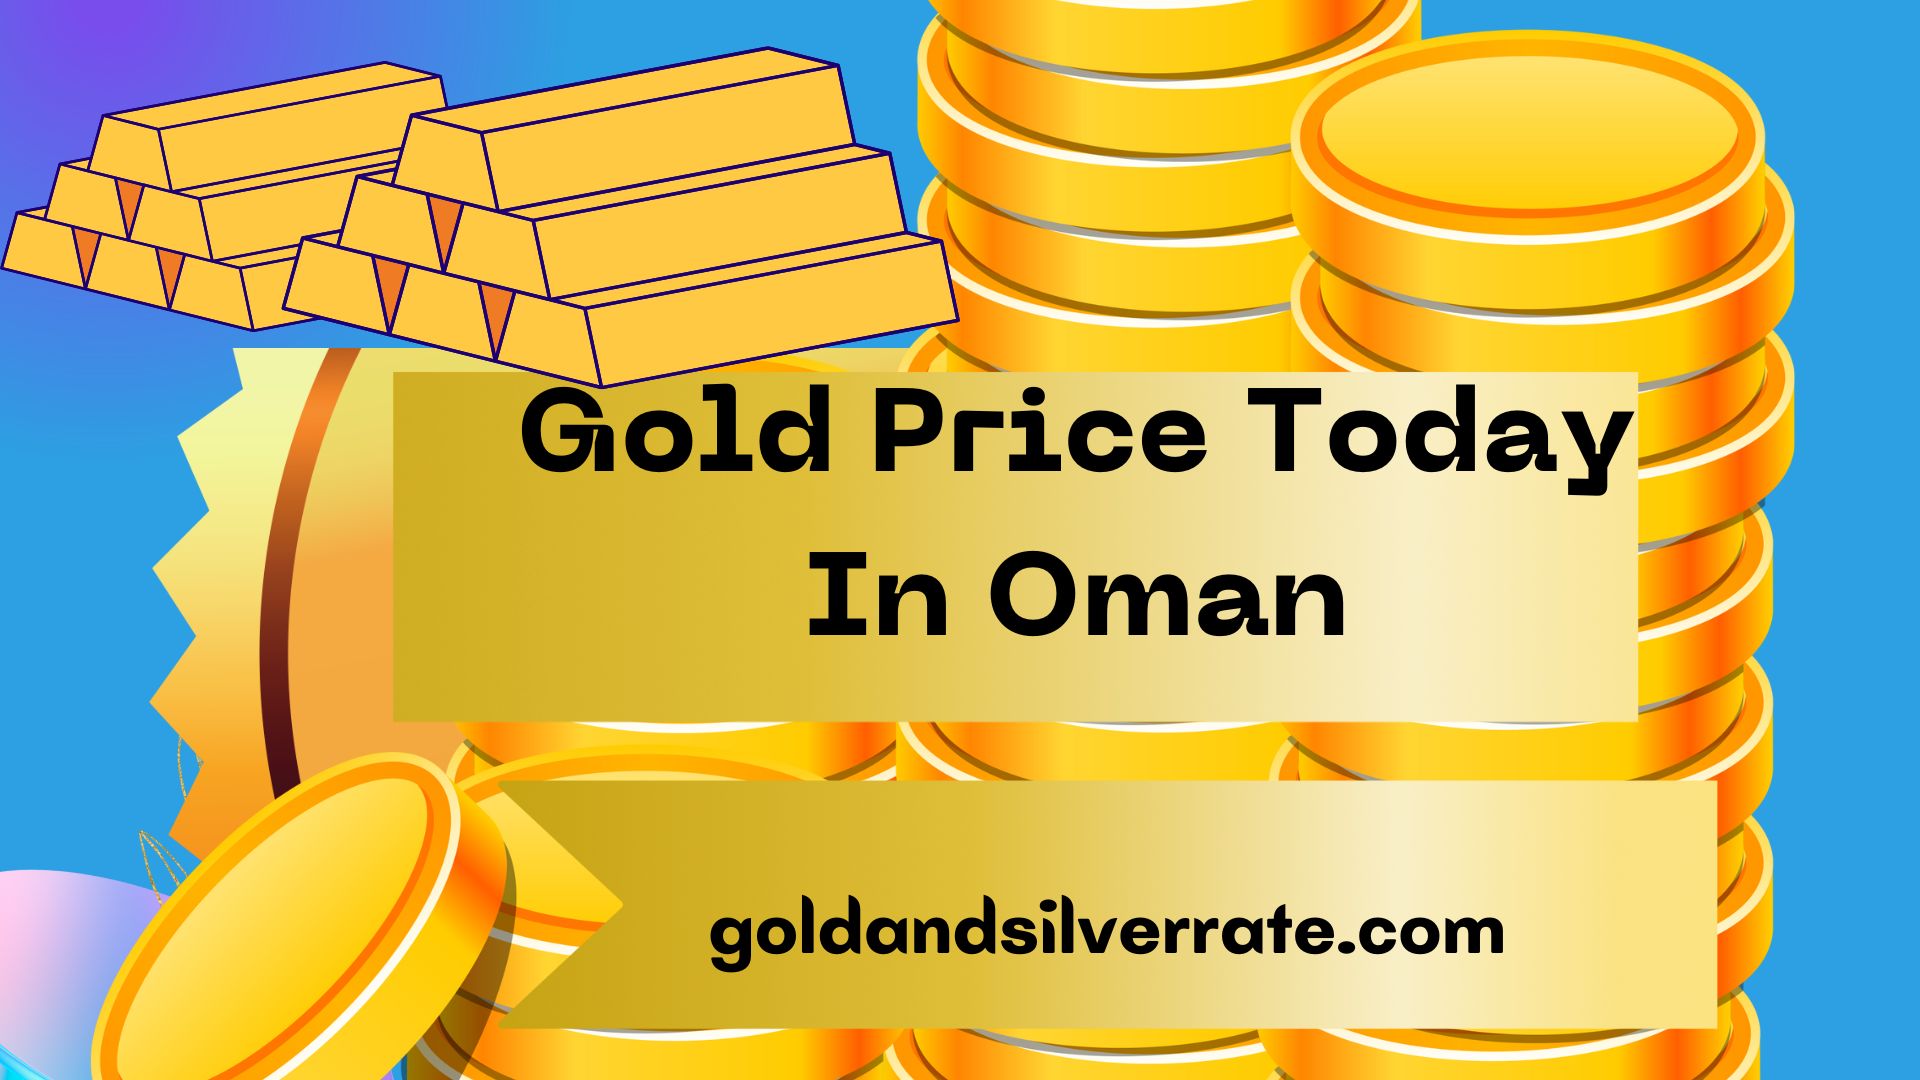 Gold Price Today In Oman